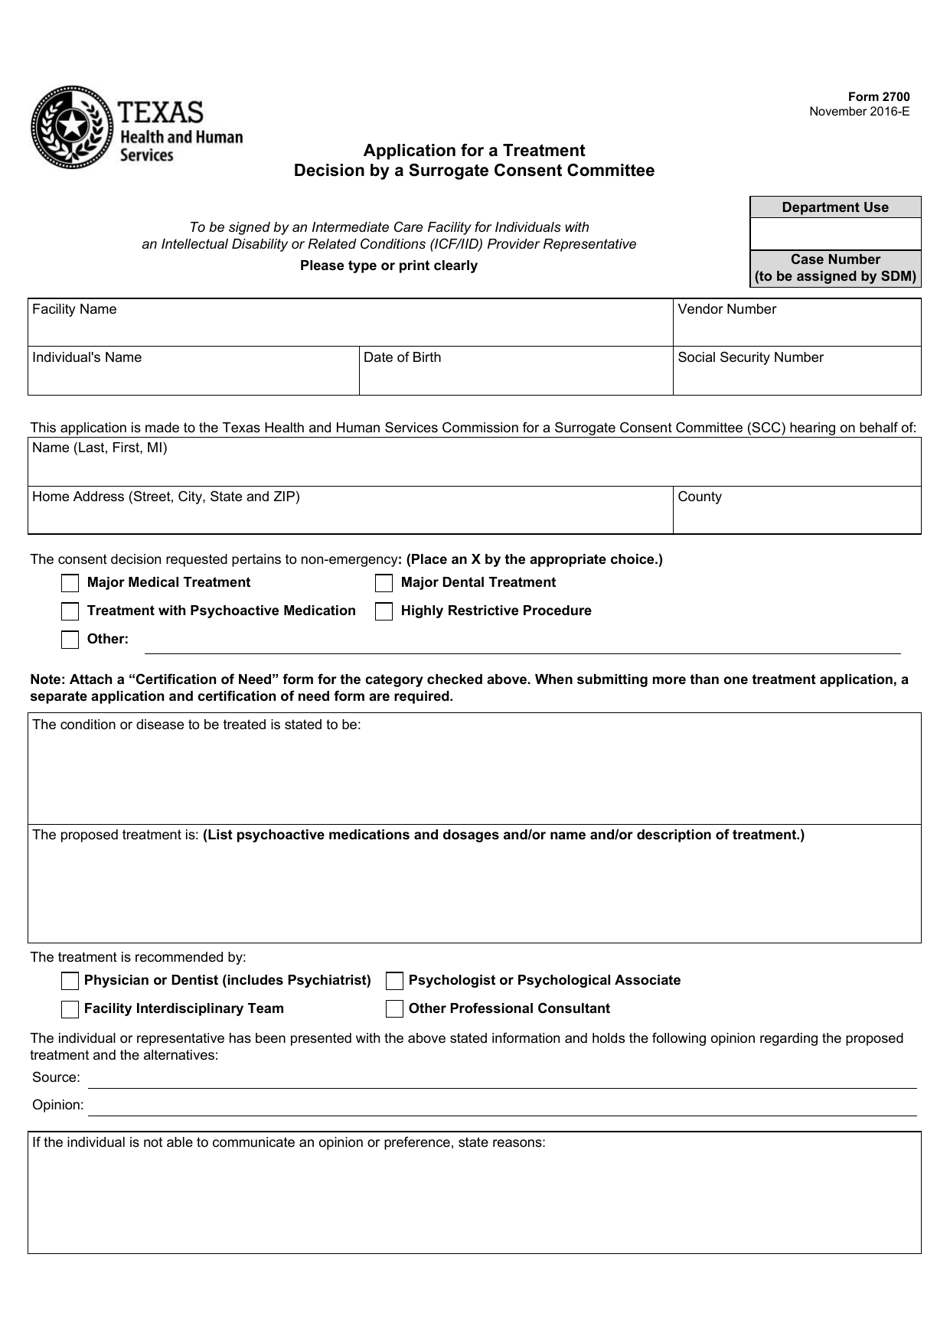 Form 2700 Application for a Treatment Decision by a Surrogate Consent Committee - Texas, Page 1